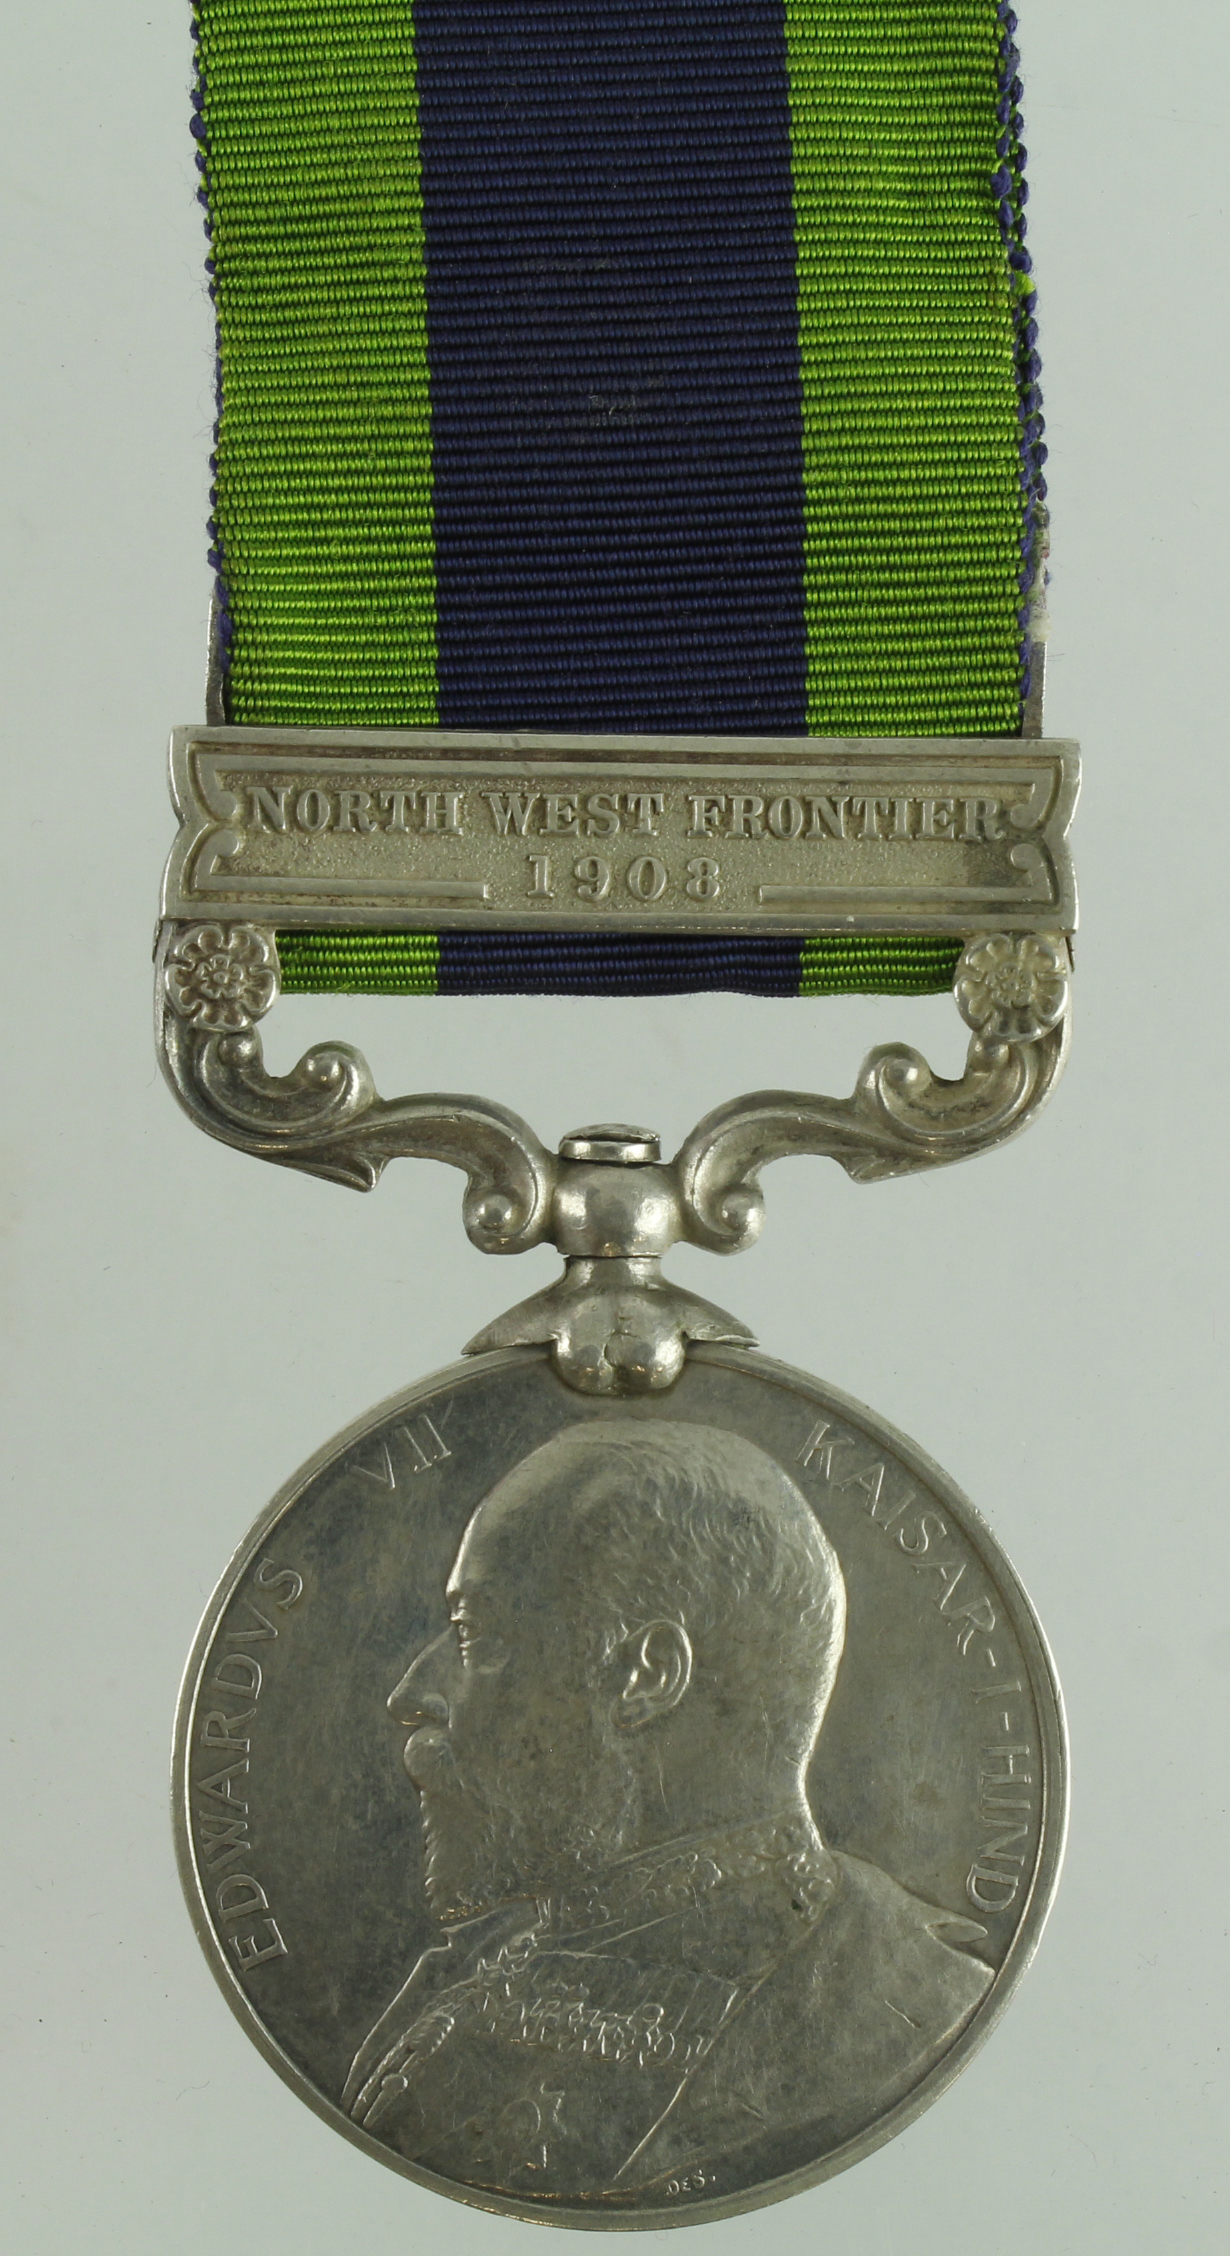 IGS EDVII with NWF 1908 clasp (294 Sepoy Rulia Singh 45th Sikhs)